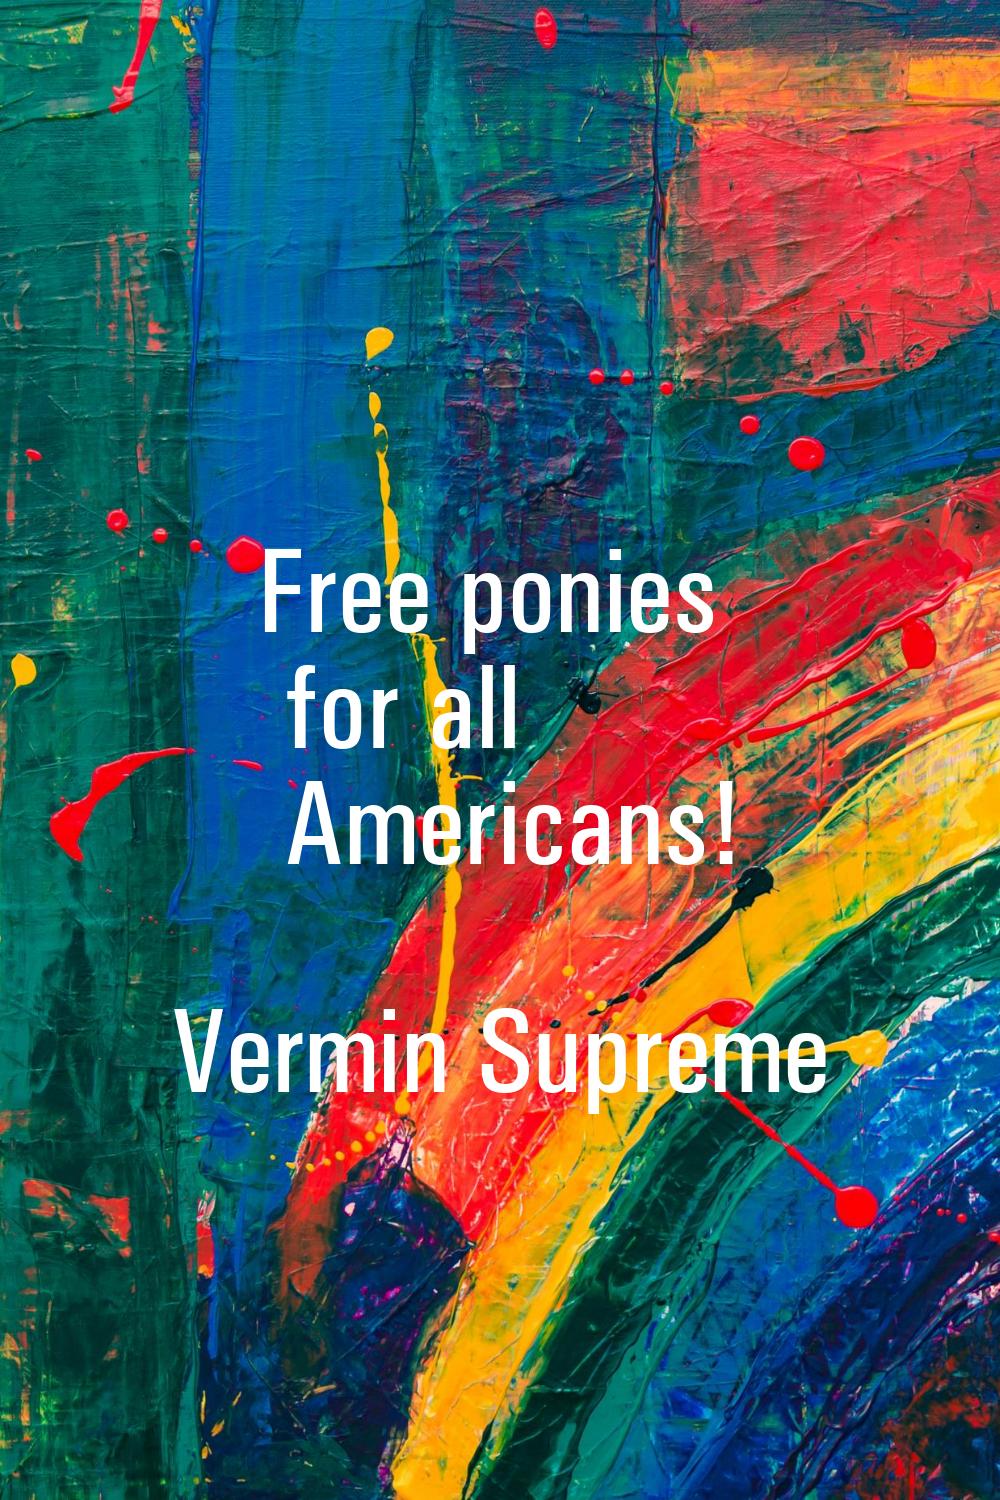 Free ponies for all Americans!